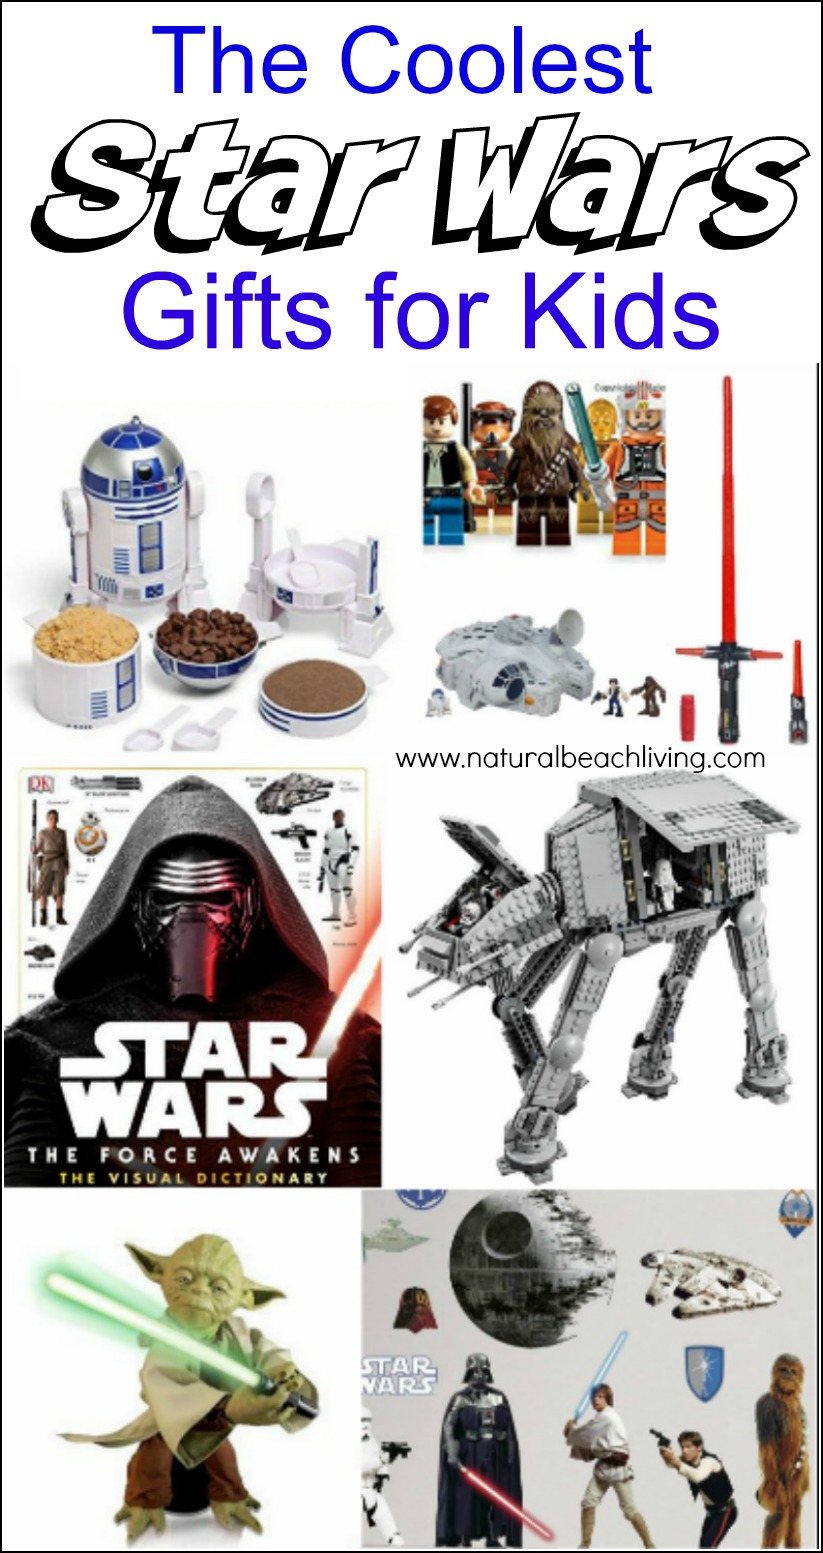 The Coolest Star Wars Gifts for Kids